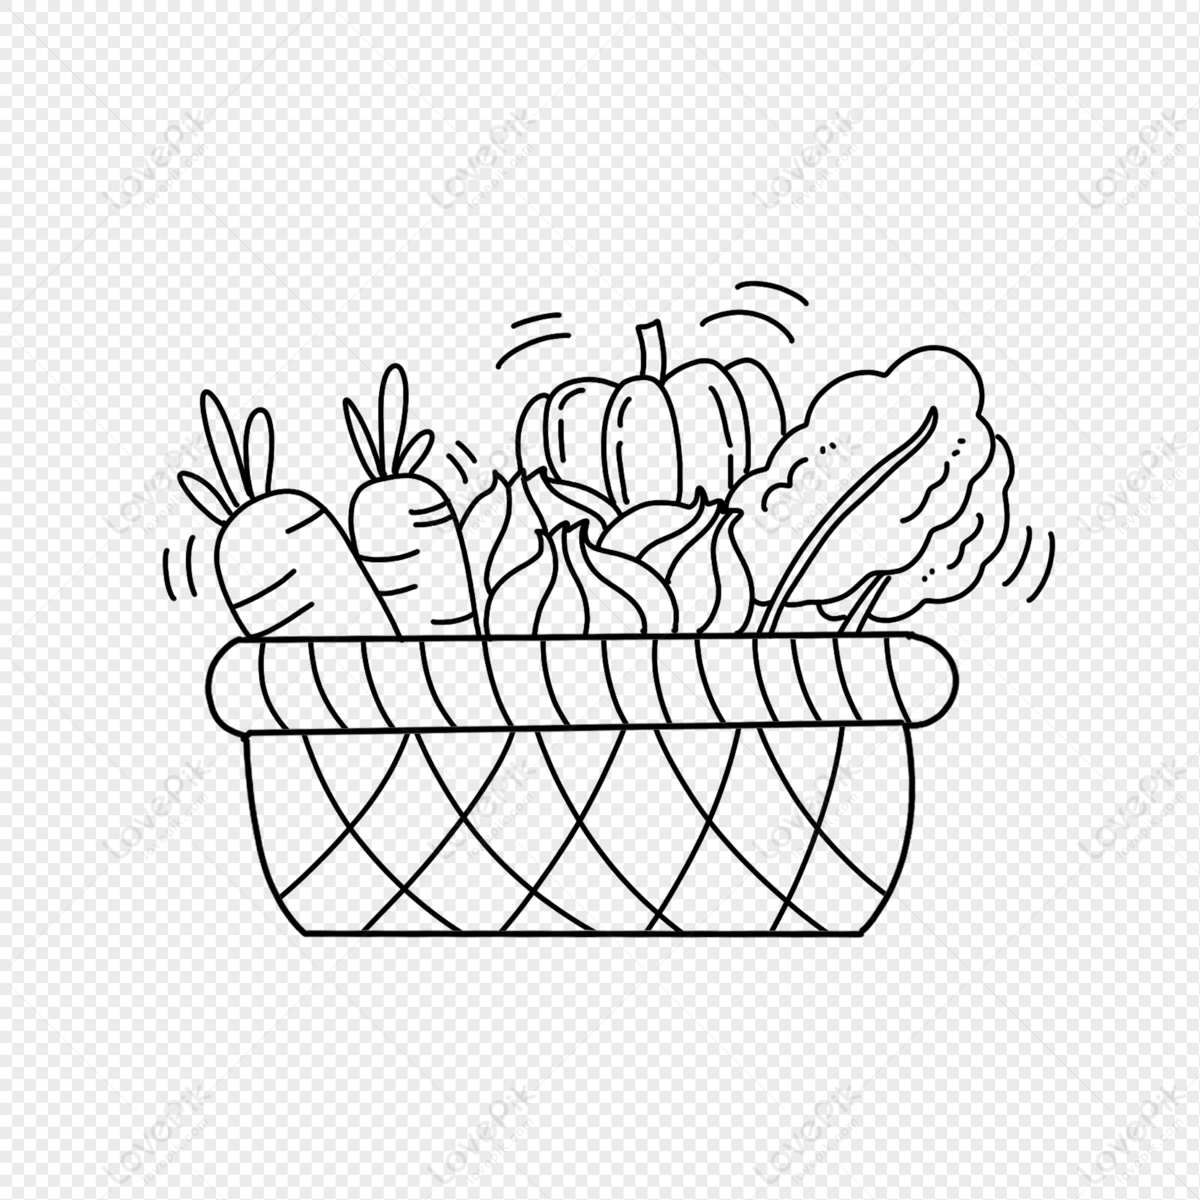 How to draw a Vegetables Basket easy and simple, Winter Vegetables drawing  - YouTube